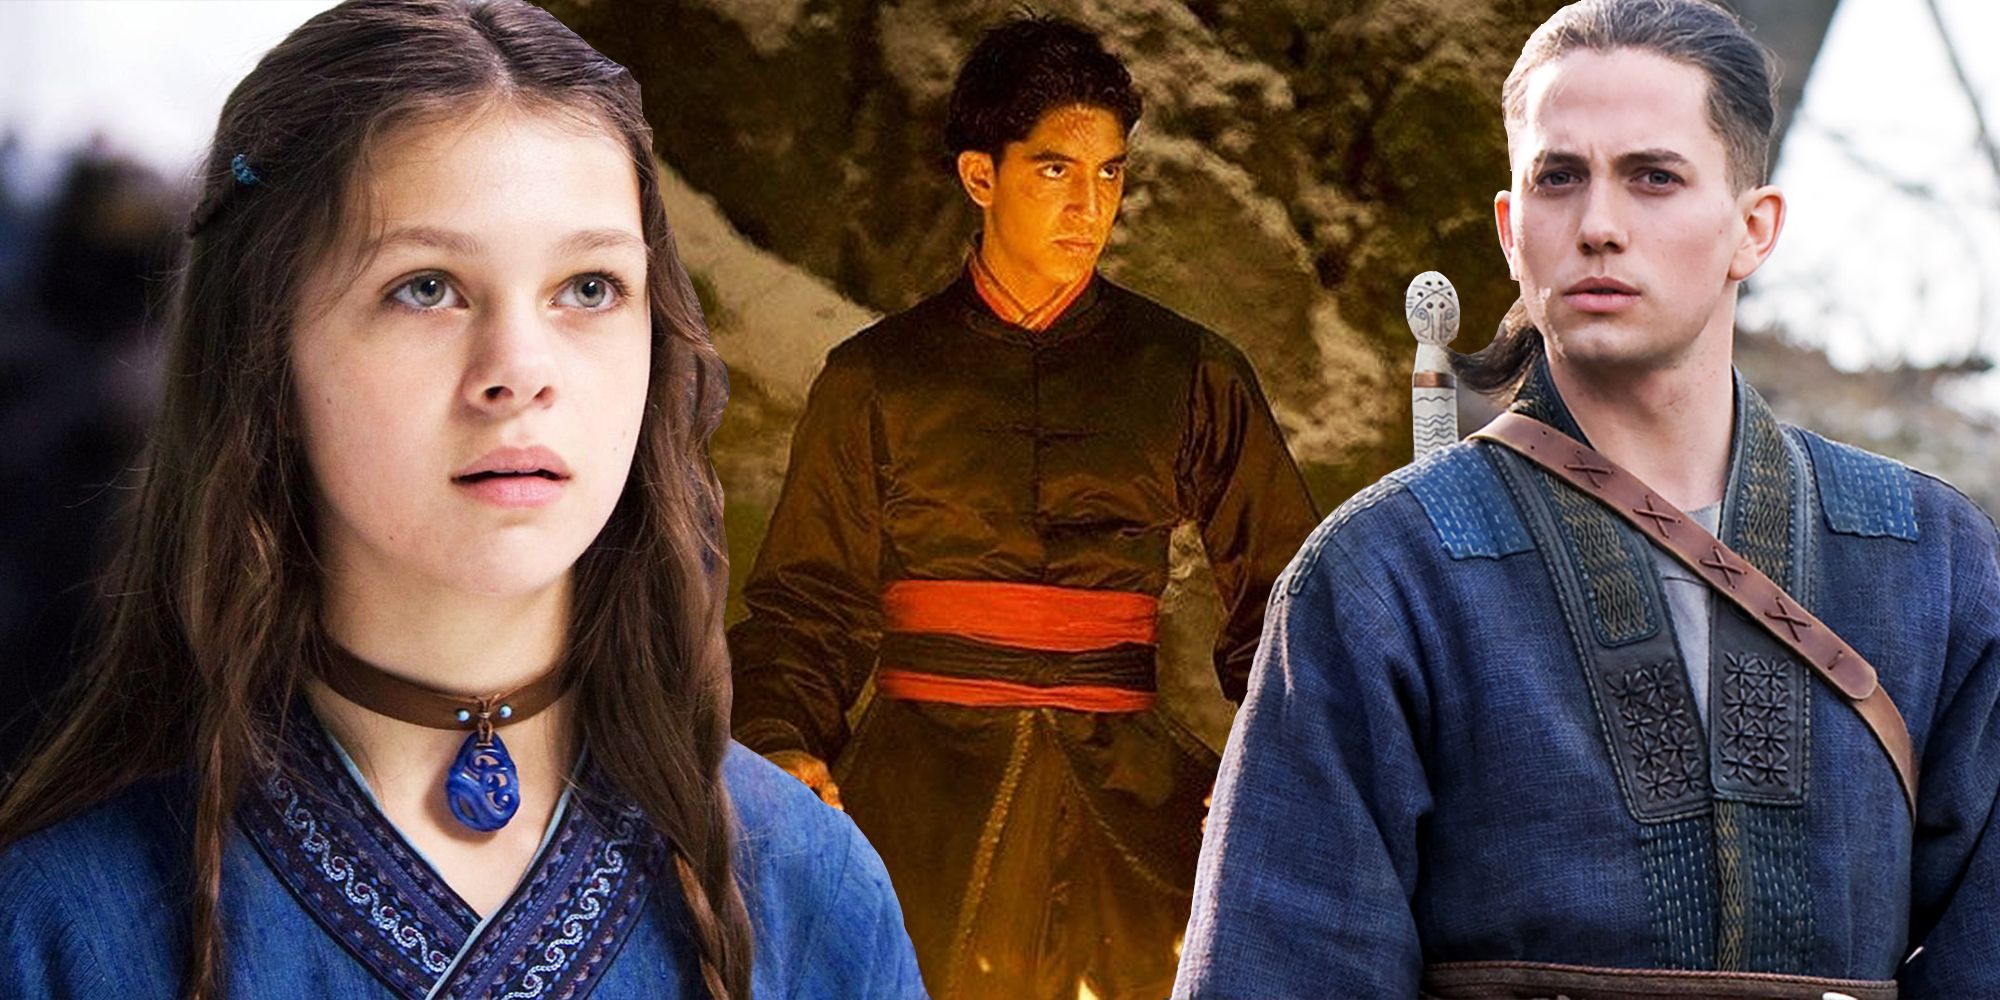 Avatar What The Last Airbender Cast & Crew Think About Shyamalans Movie